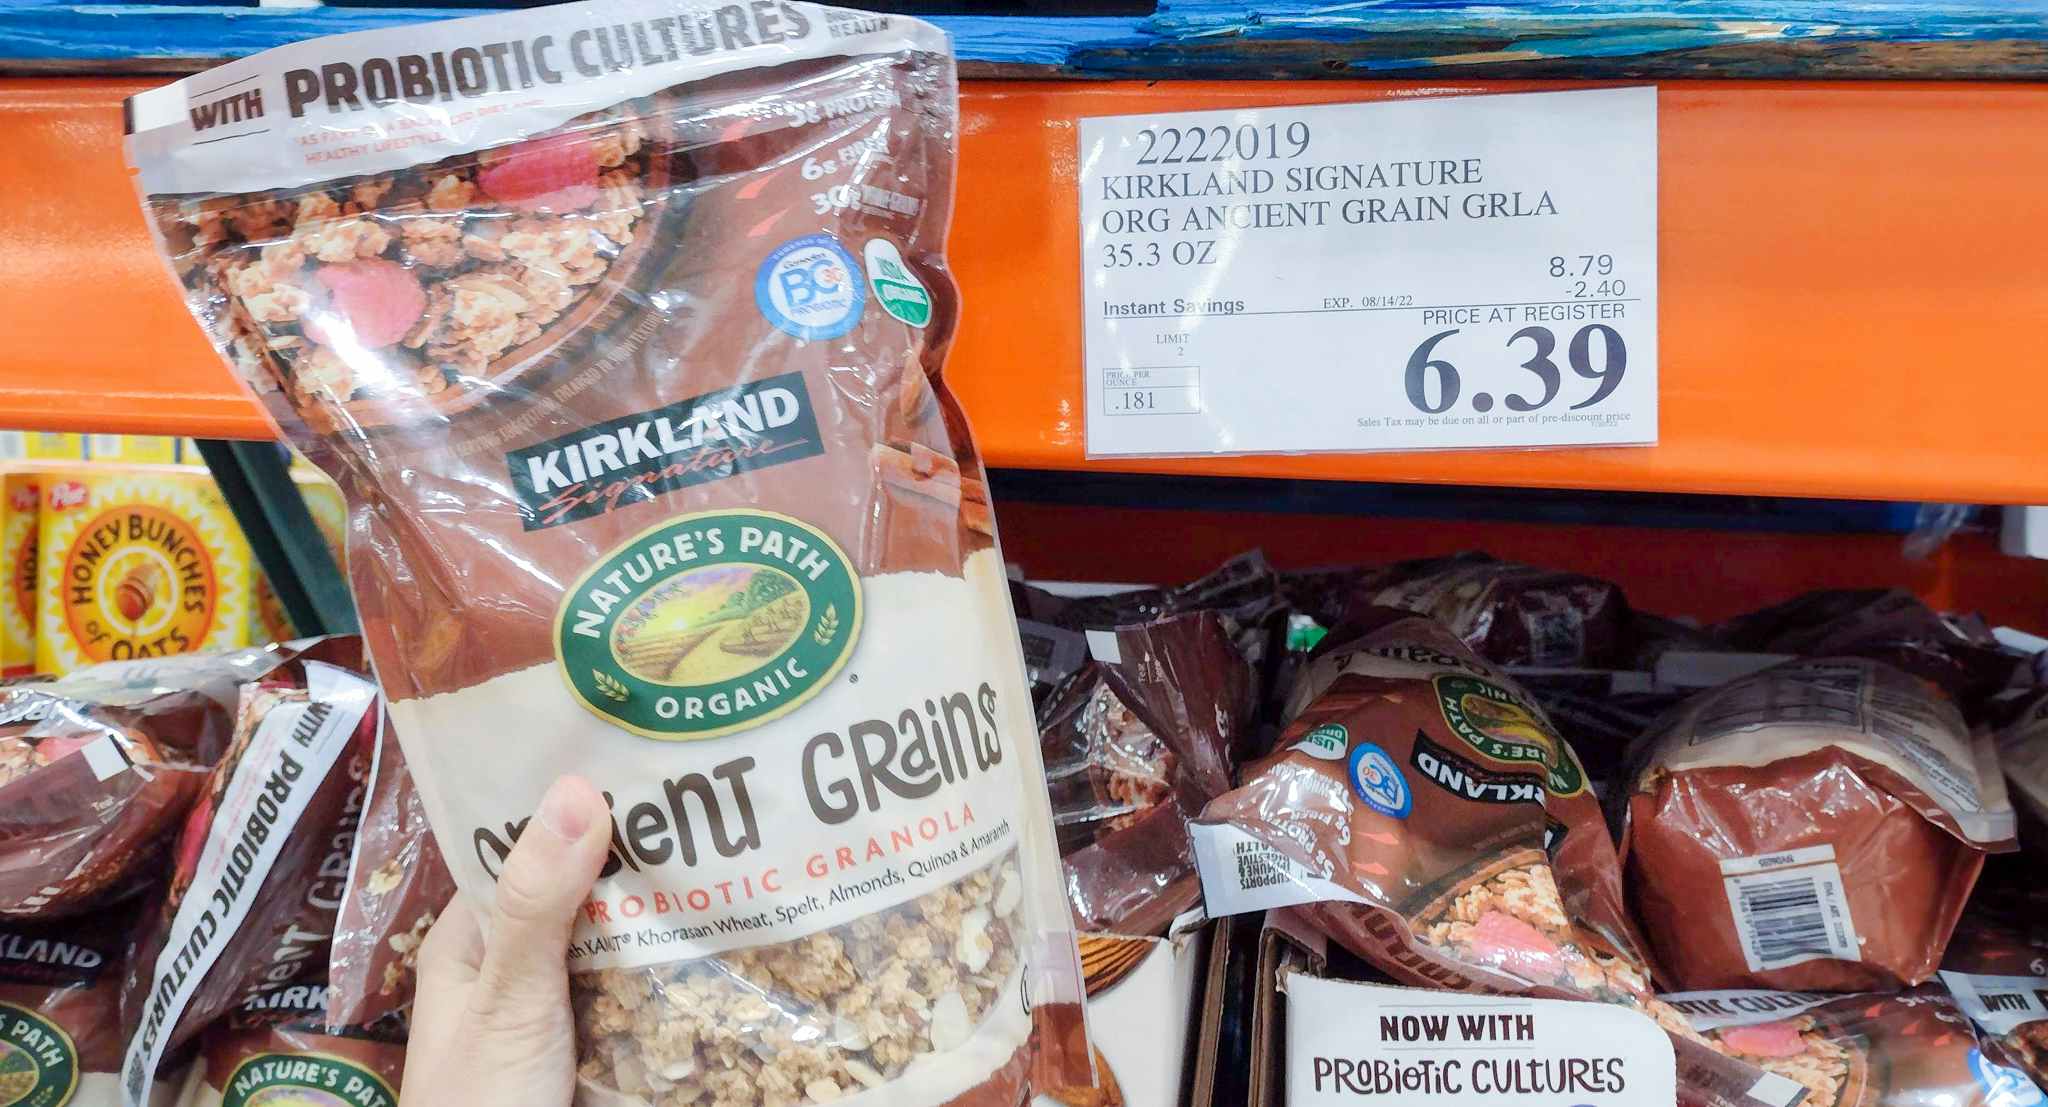 grains held in hand near sales sign 